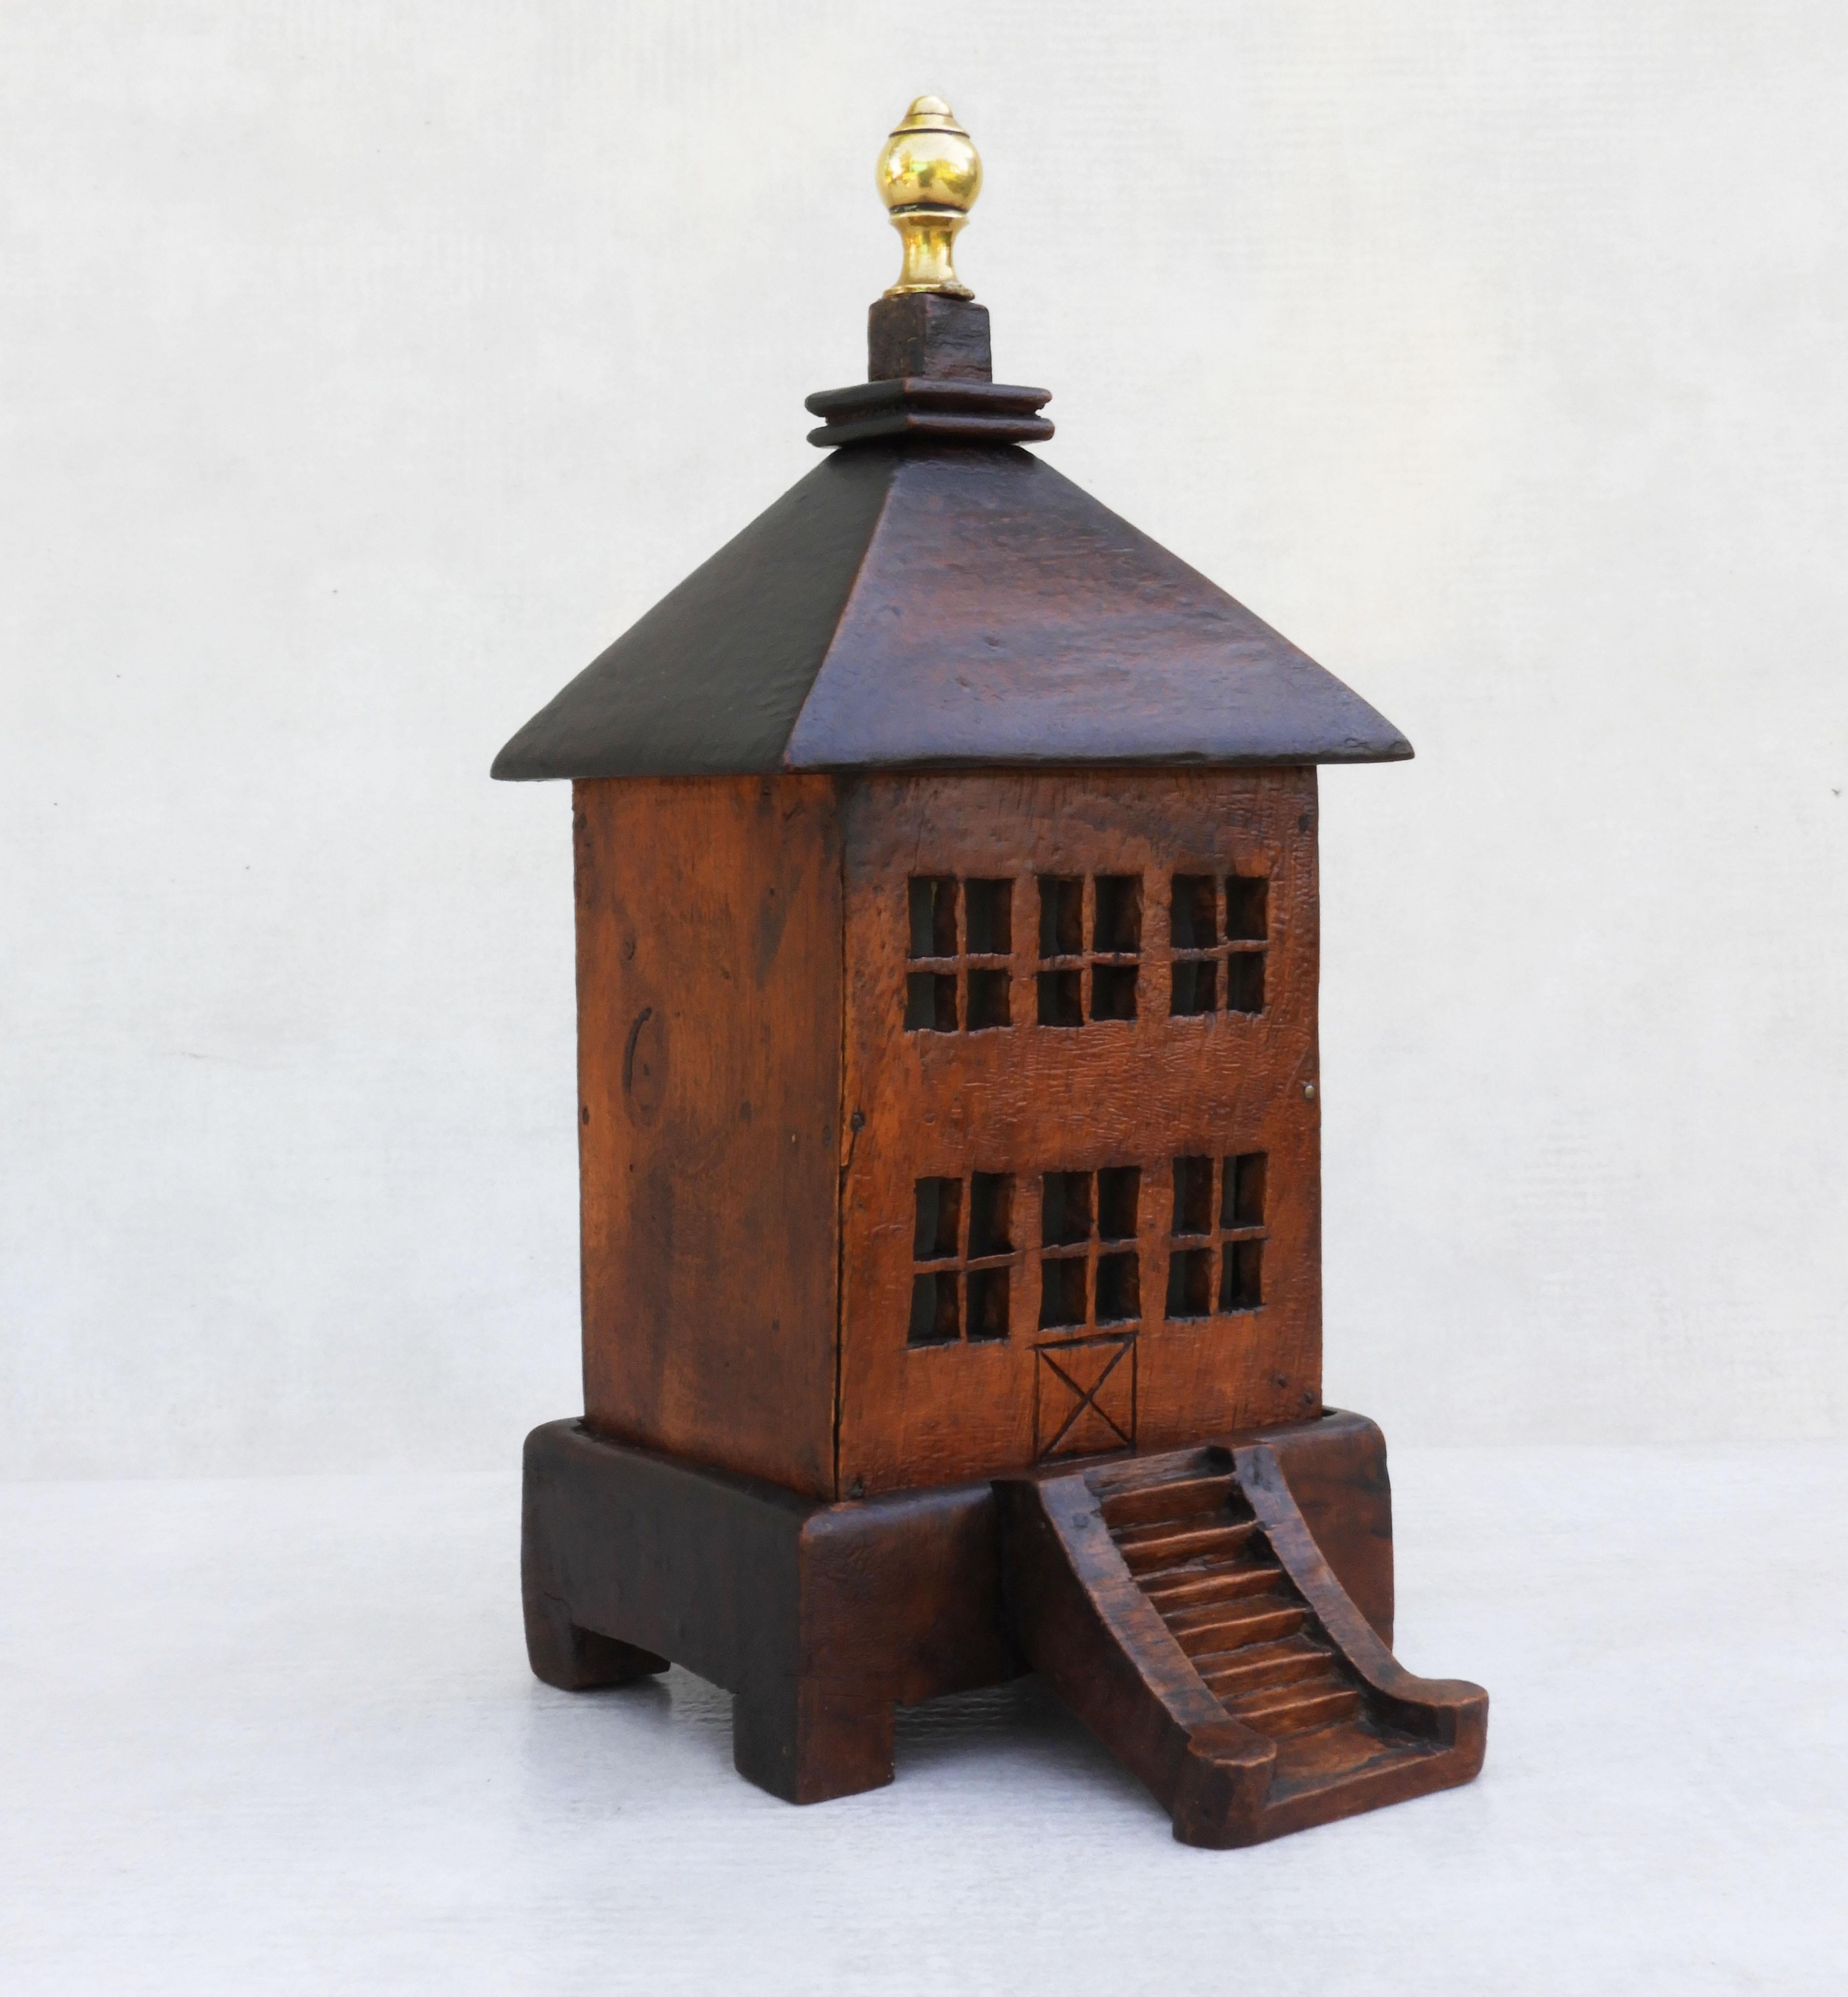 Folk Art money box c1900 France
A fabulous example of French 'Arte Populaire' this 'Maison Tirelire' is handcrafted in wood complete with a carved staircase entrance, glass windows and brass roof finial.  All in very good original condition with